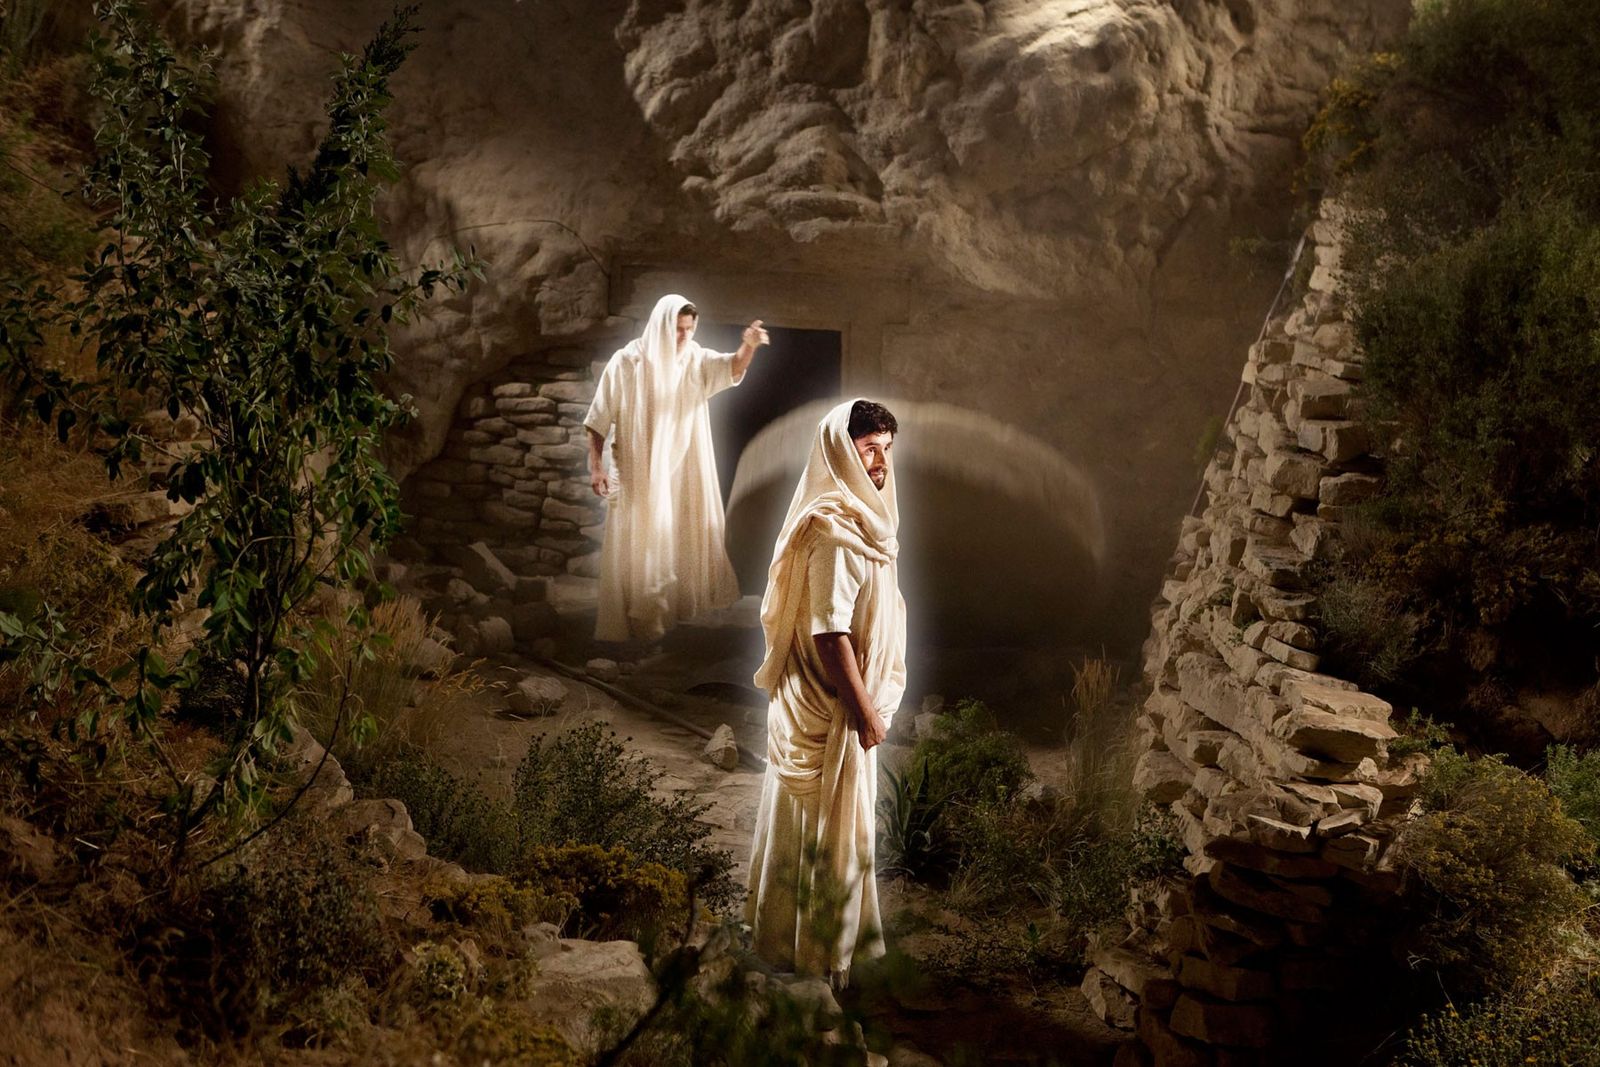 Angels come down and open the tomb where Christ's body lays.